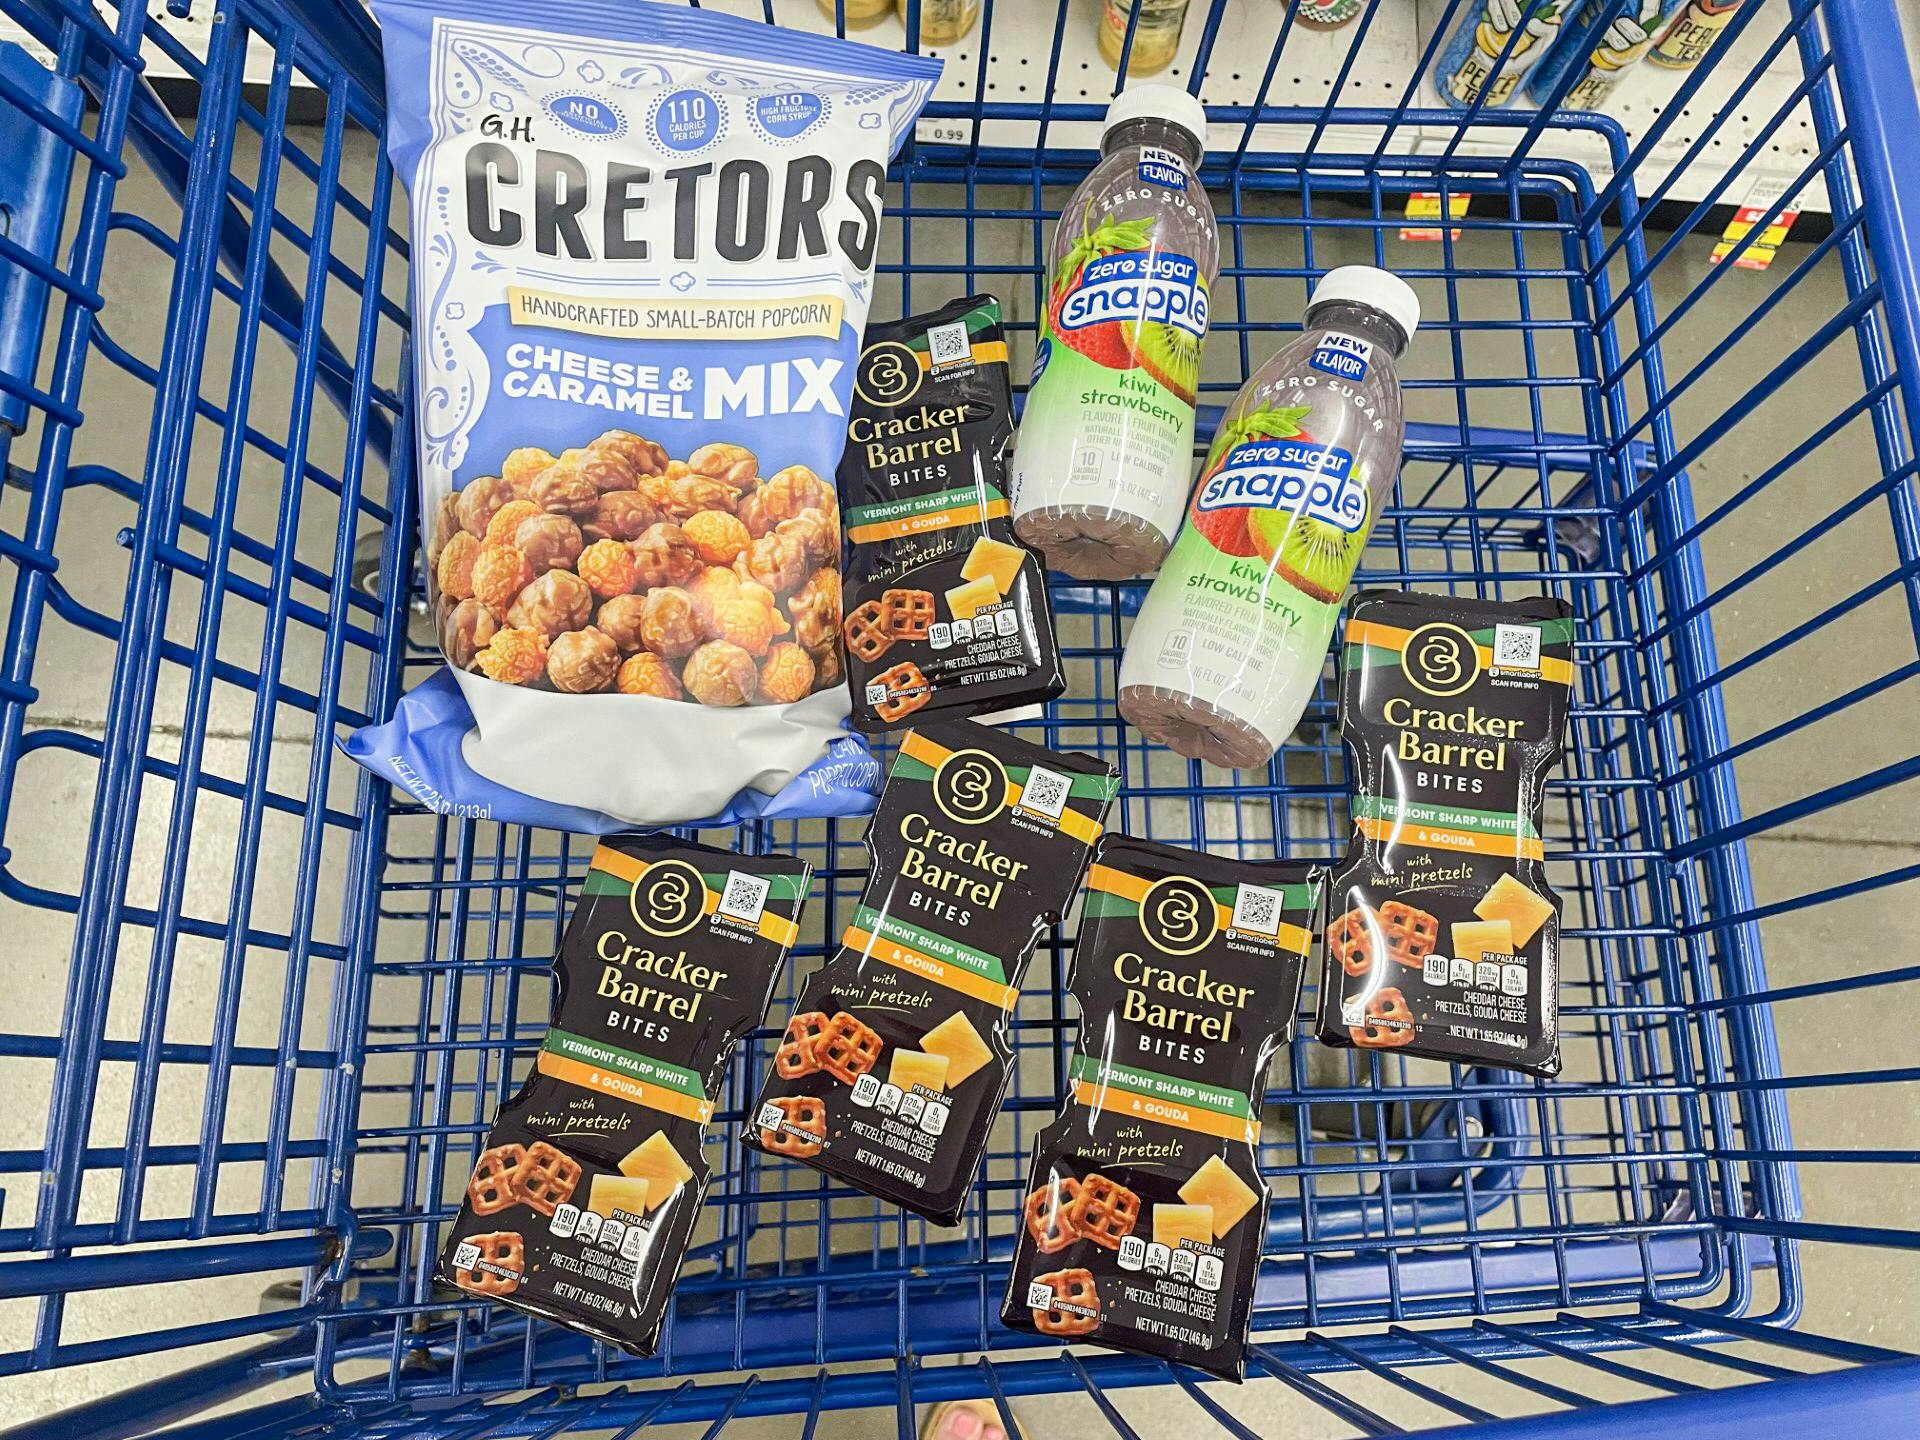 meijer-shopping-haul-i-saved-90-on-groceries-using-rebates-the